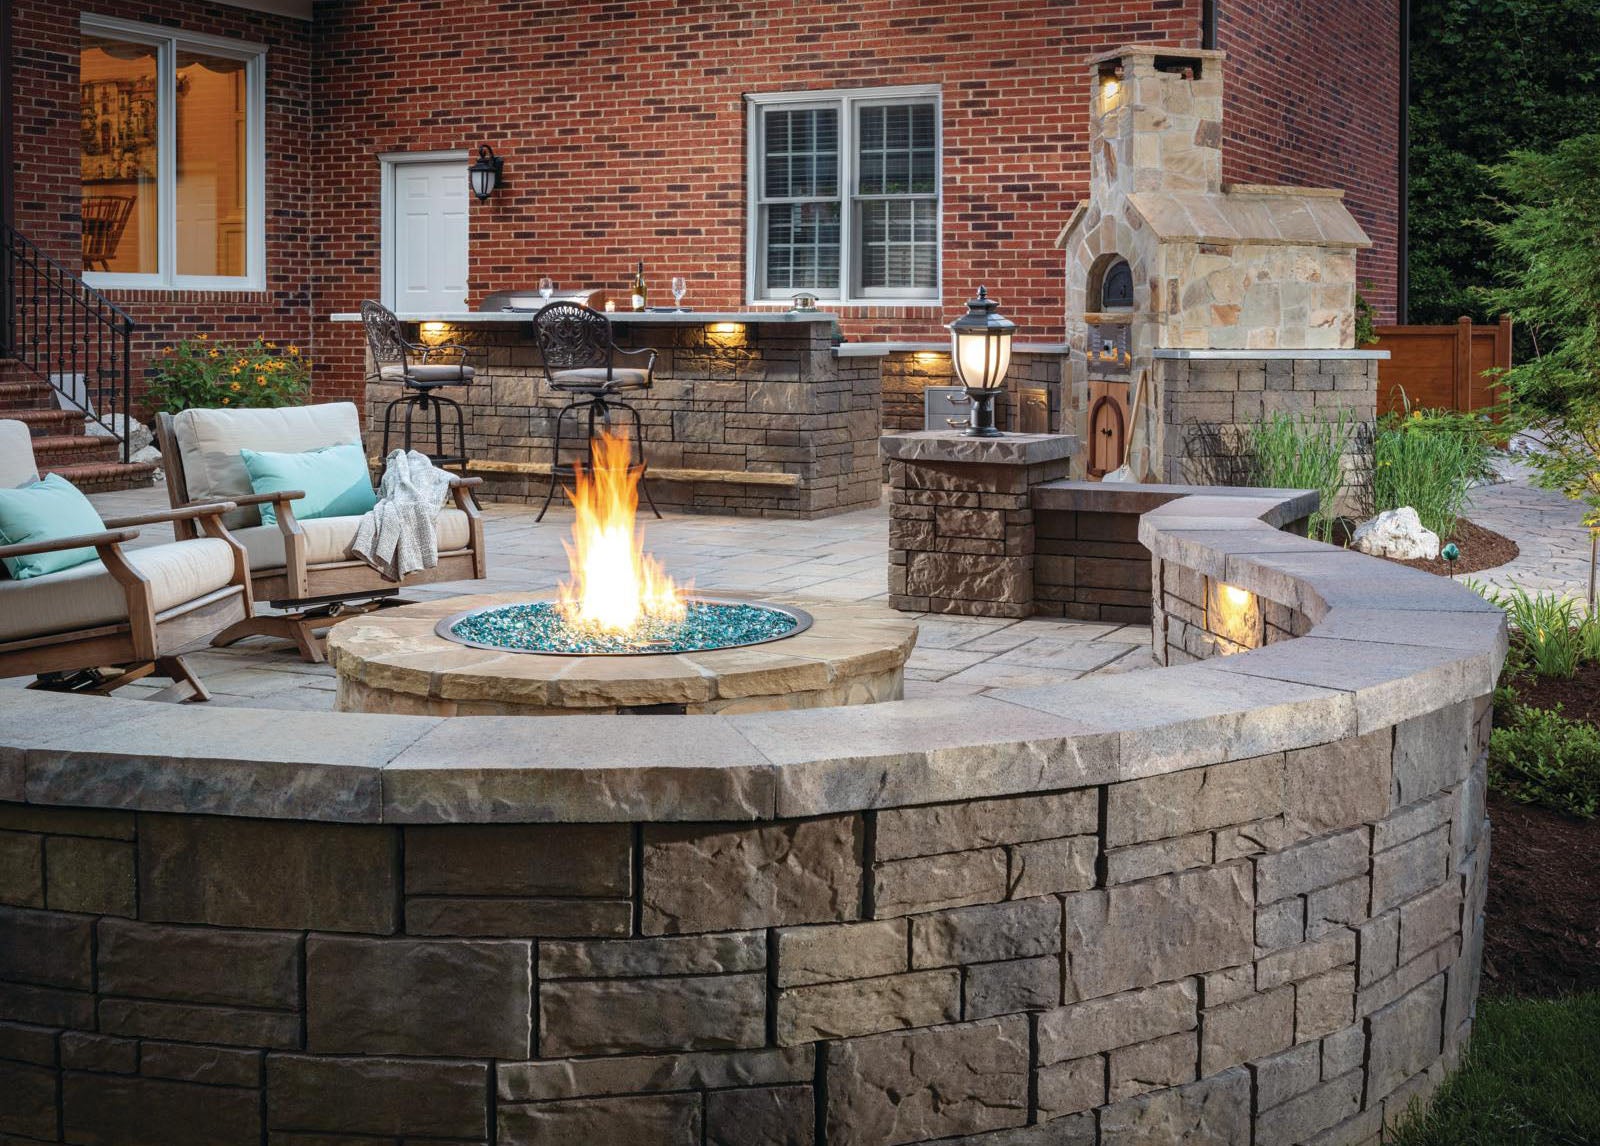 Designing A Patio Around Fire Pit, Paver Patio With Fire Pit Images